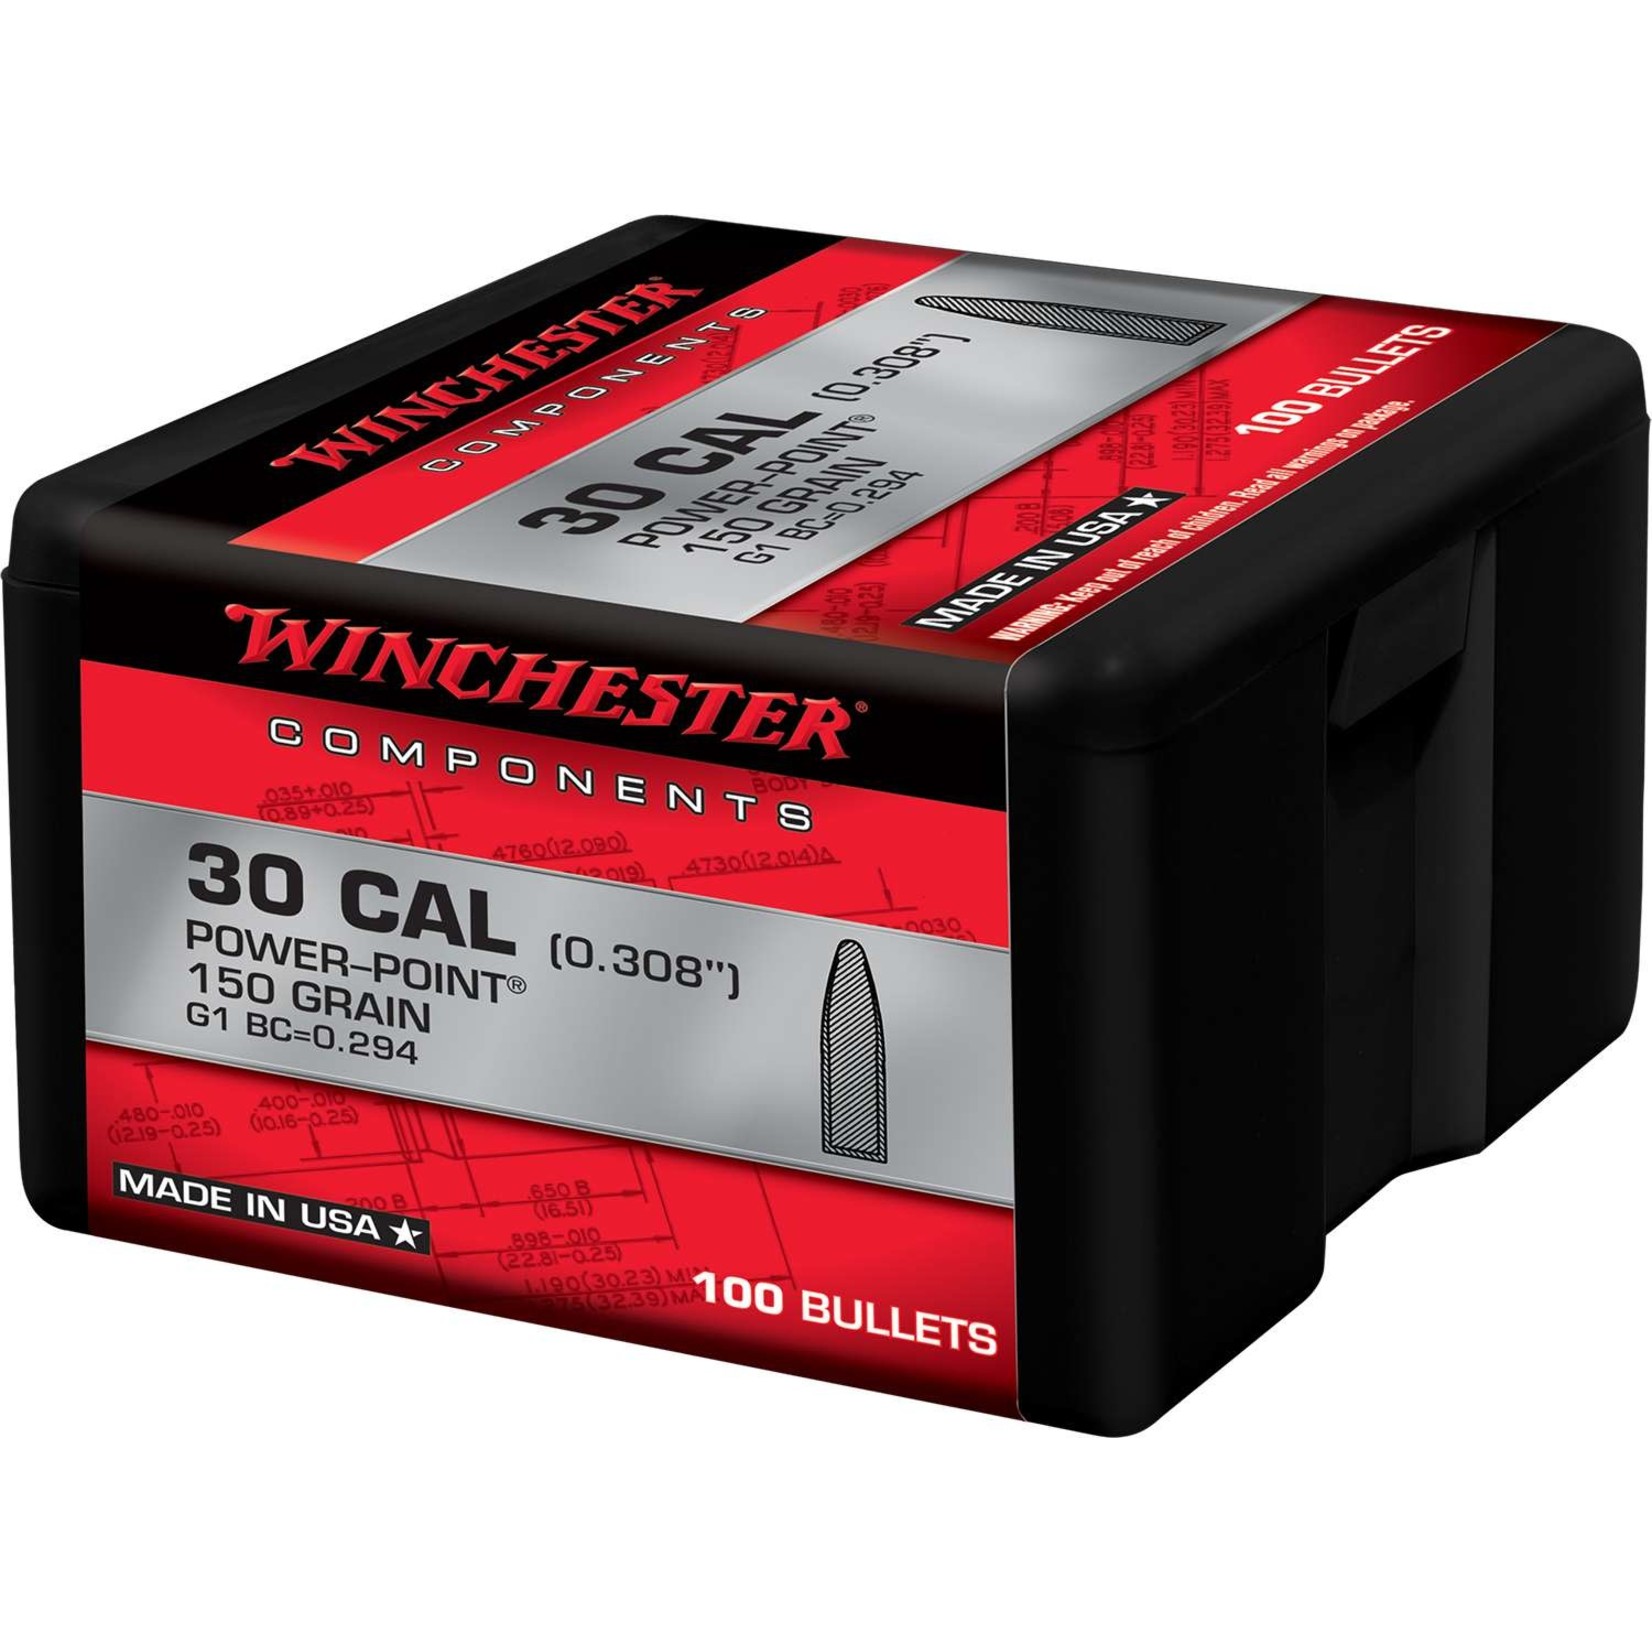 Winchester Winchester 30 cal - 150gr Projectiles - 100 Projectiles